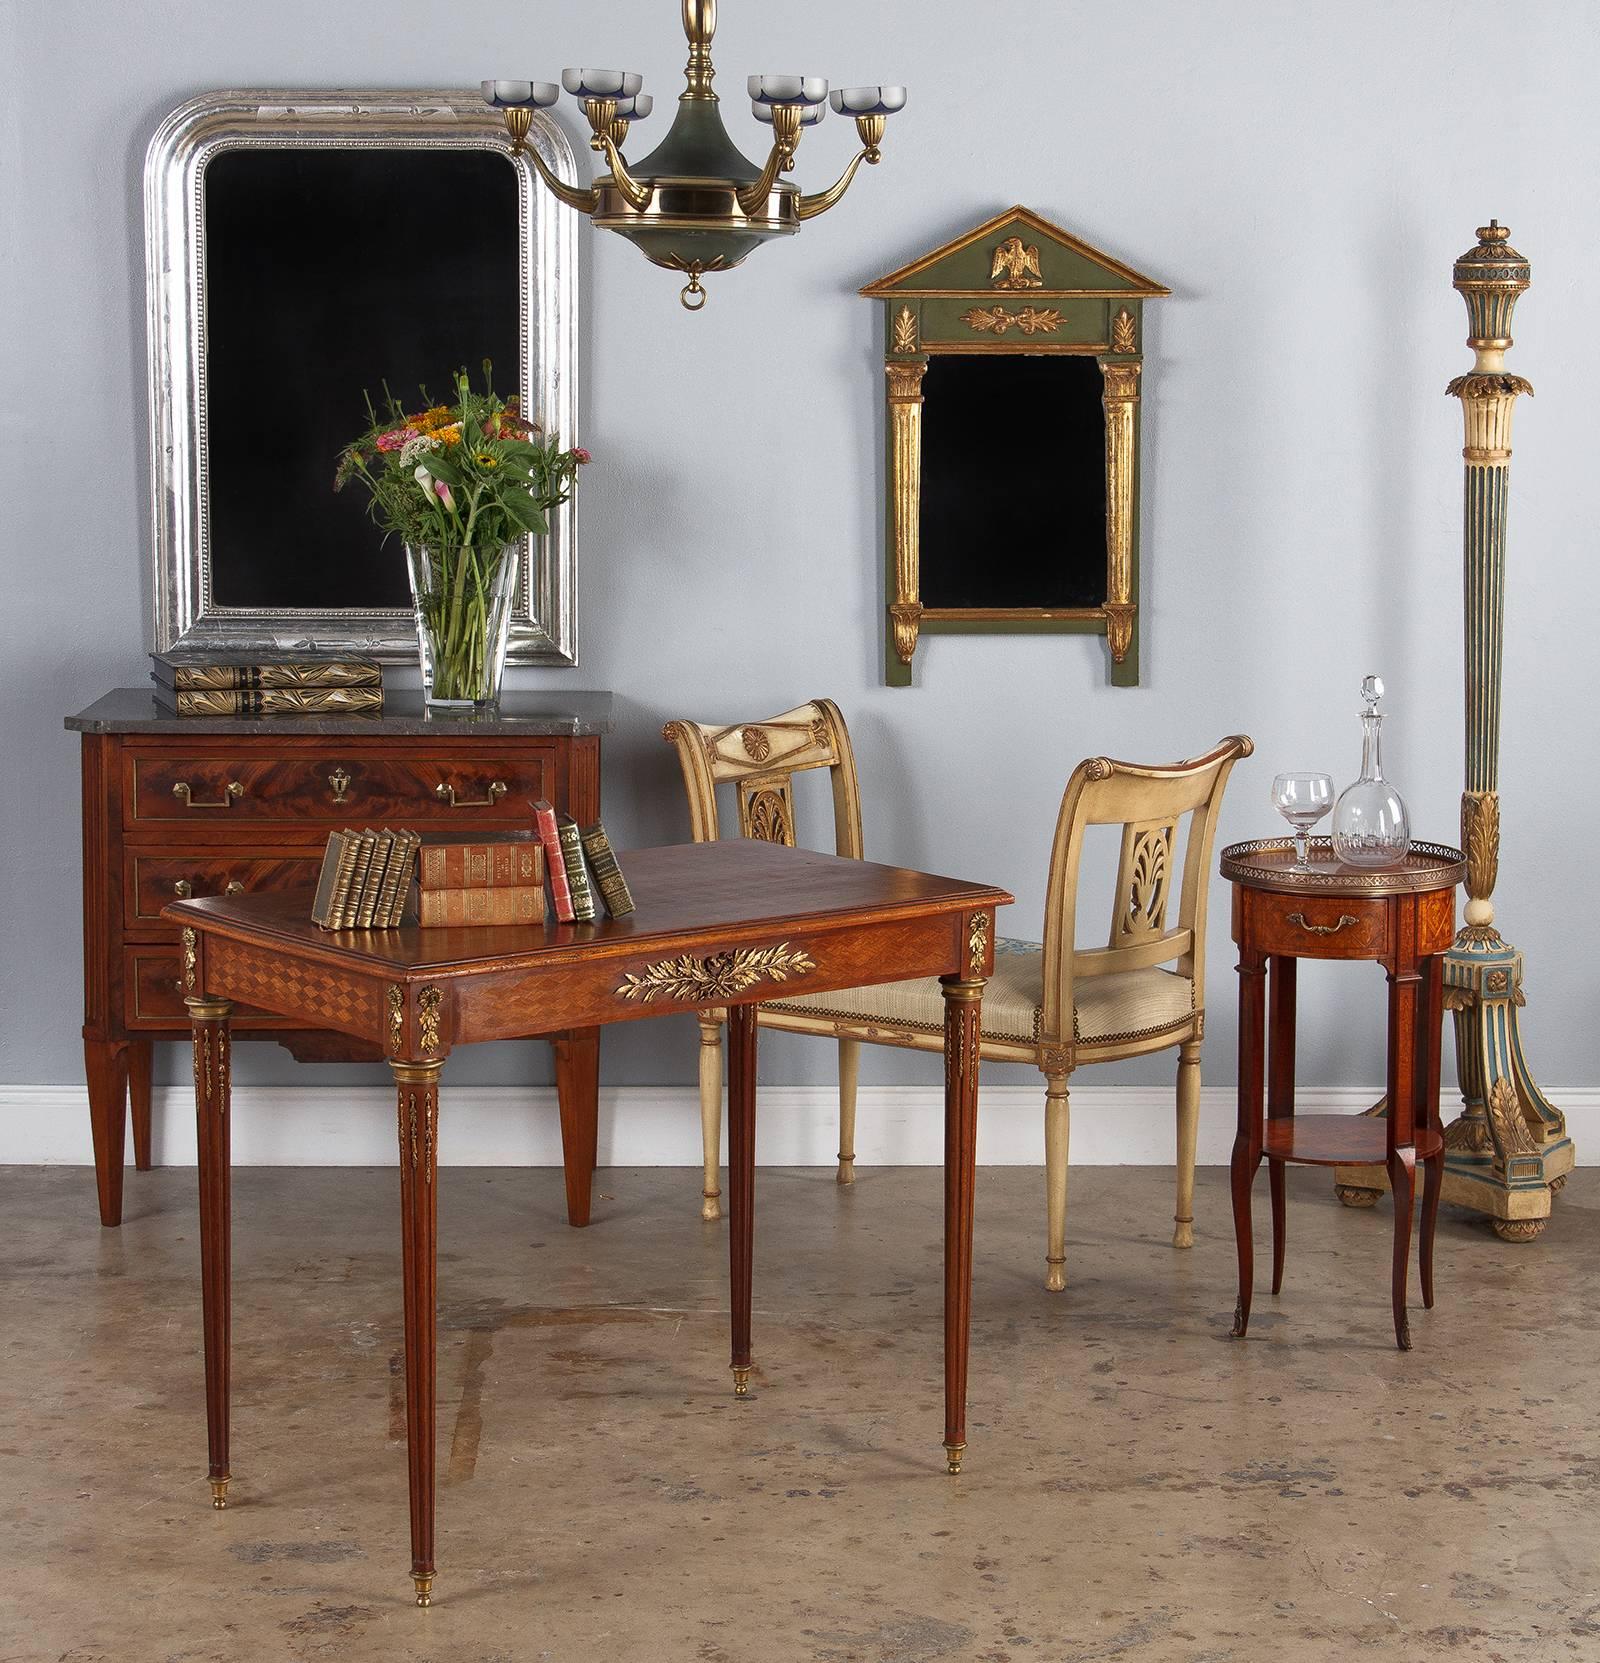 An ornate Louis XVI style desk or side table with extensive marquetry and gilt bronze ornamentation, from the late 1800s or early 1900s. Created as a writing desk for the bedroom, this piece is small in scale, but packs in loads of details. The top